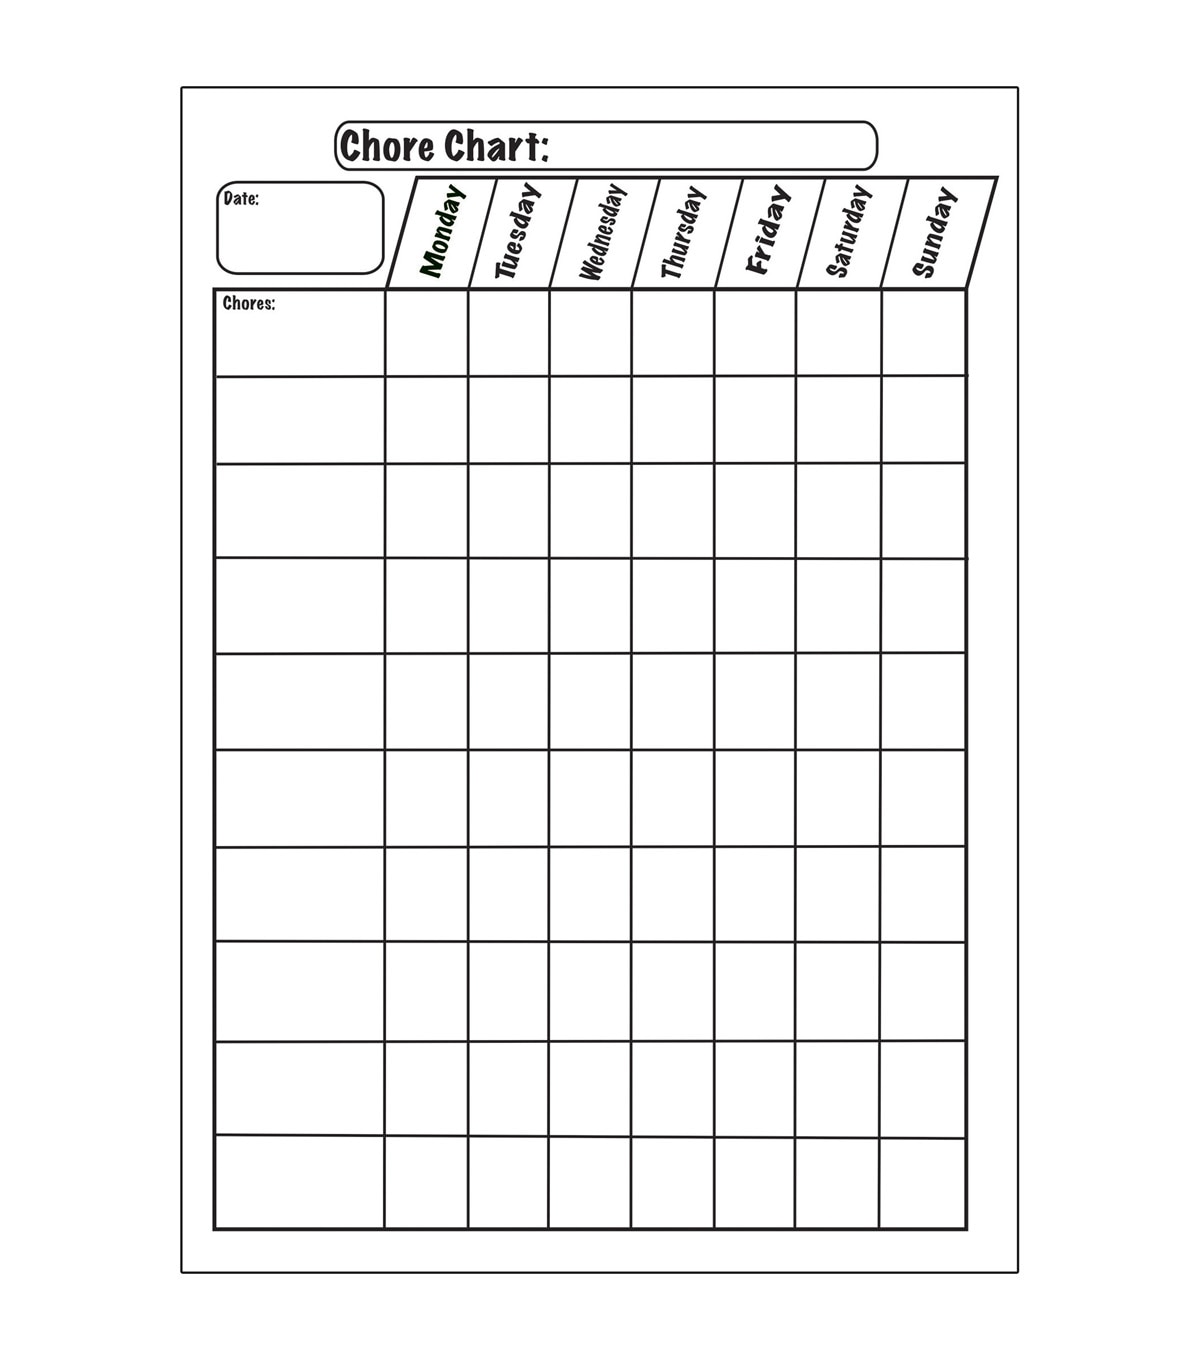 Chore Chart Images